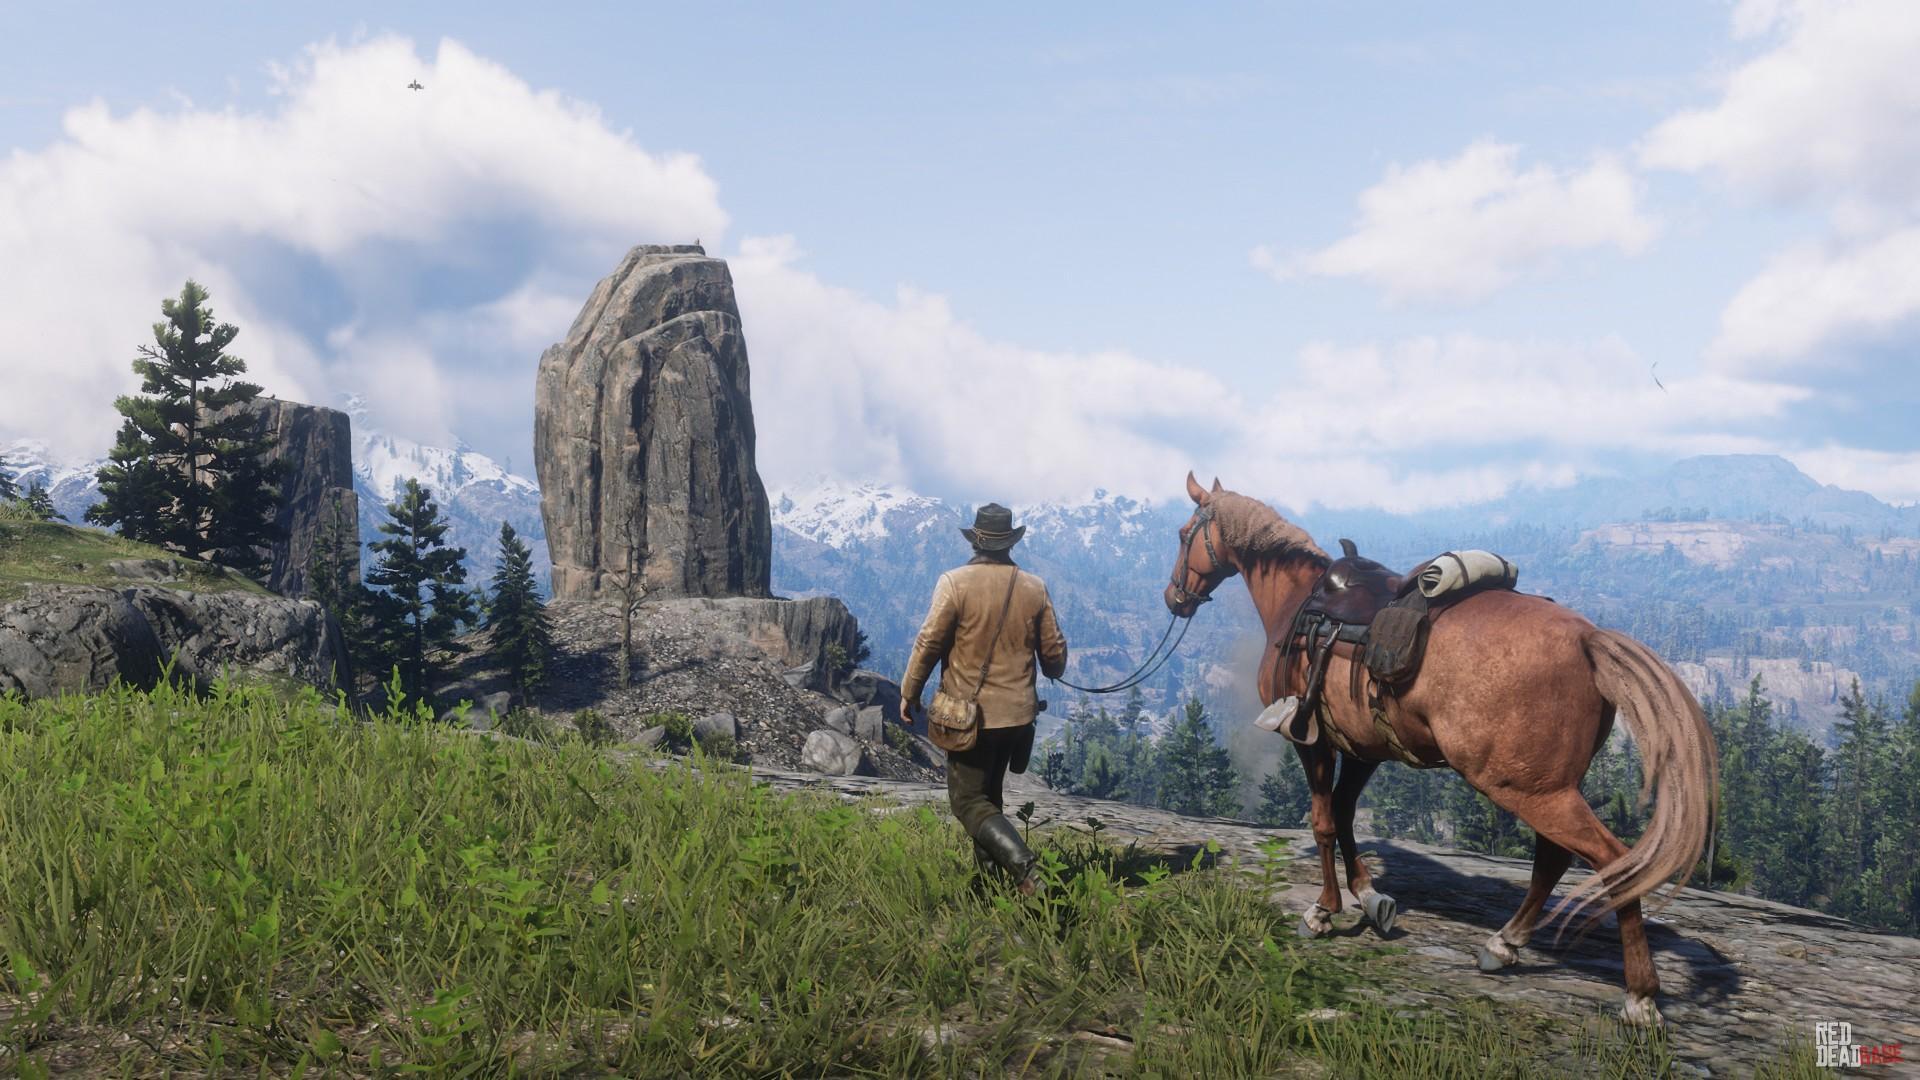 Game Rant - Red Dead Redemption 2 has broken its previous record on Steam  with an all-time peak in player count reached during Black Friday weekend.